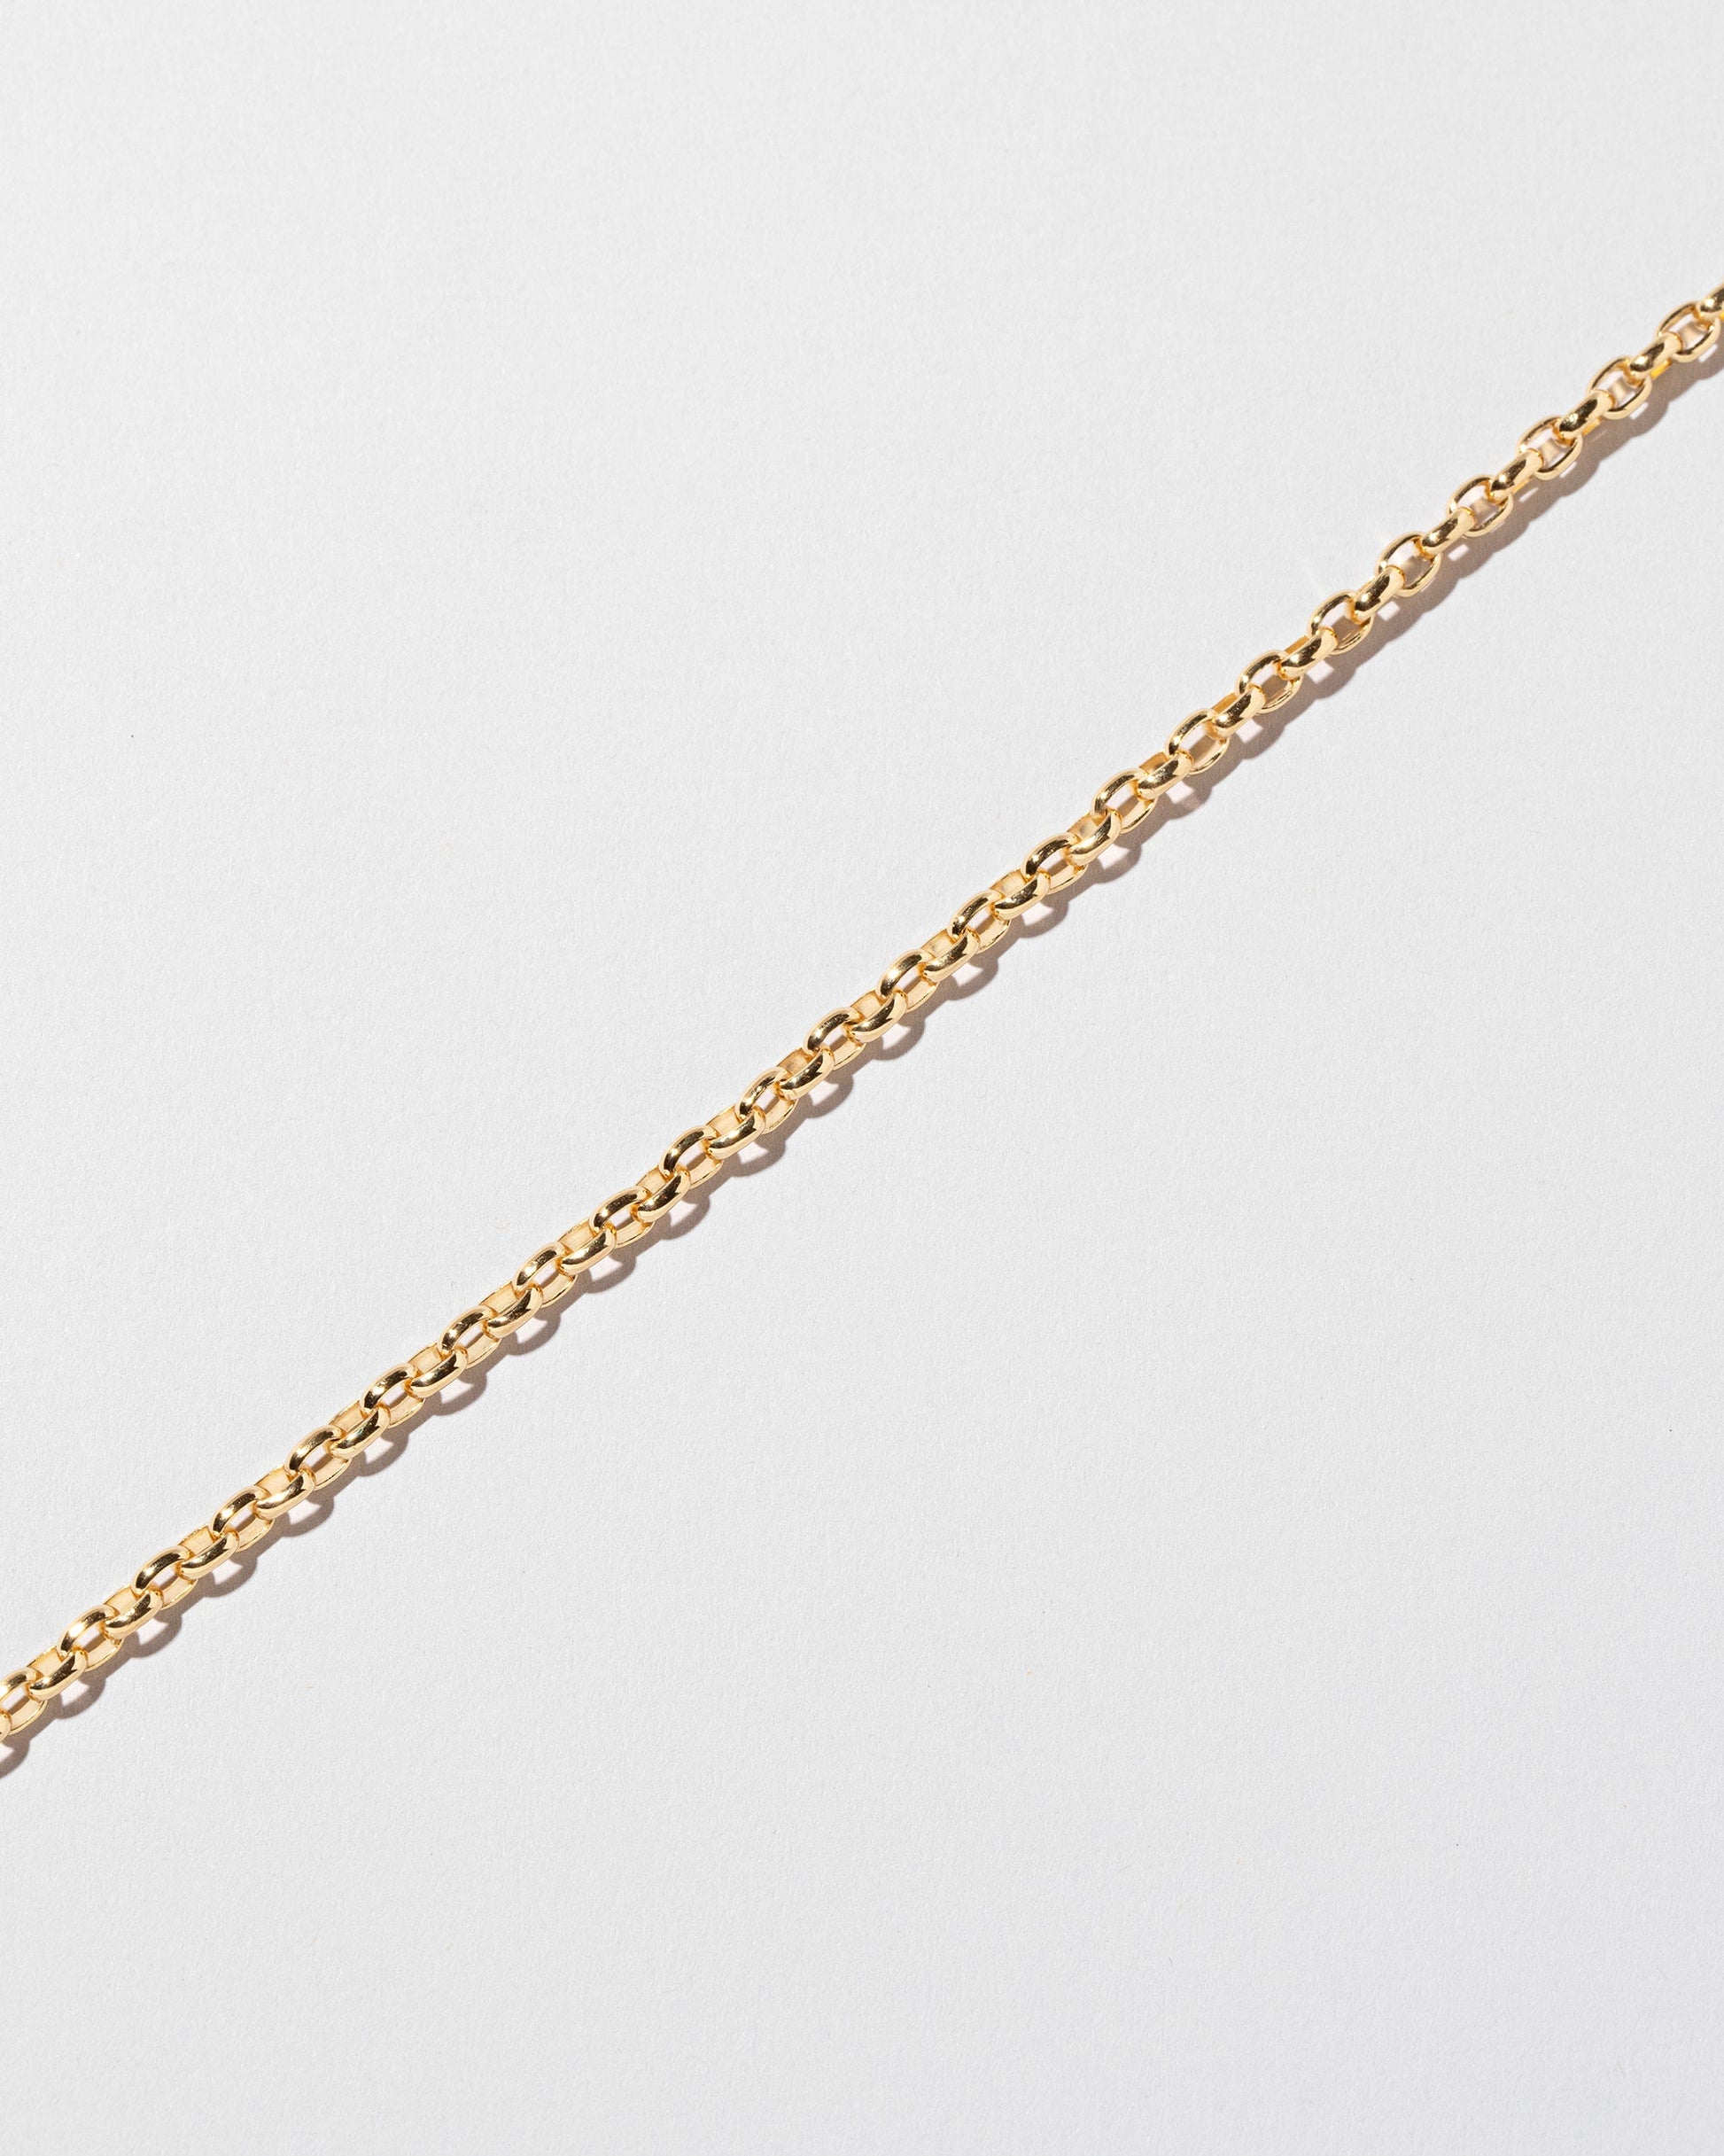  Short Loop Chain on light color background.